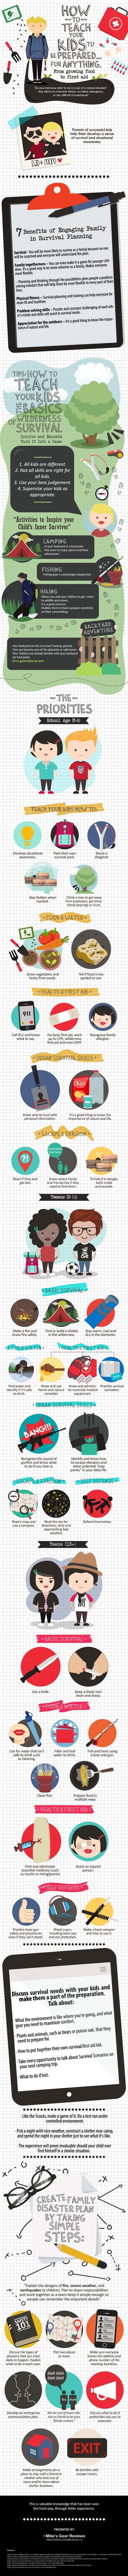 How to Teach Your Kids to be Prepared for Anything Infographic